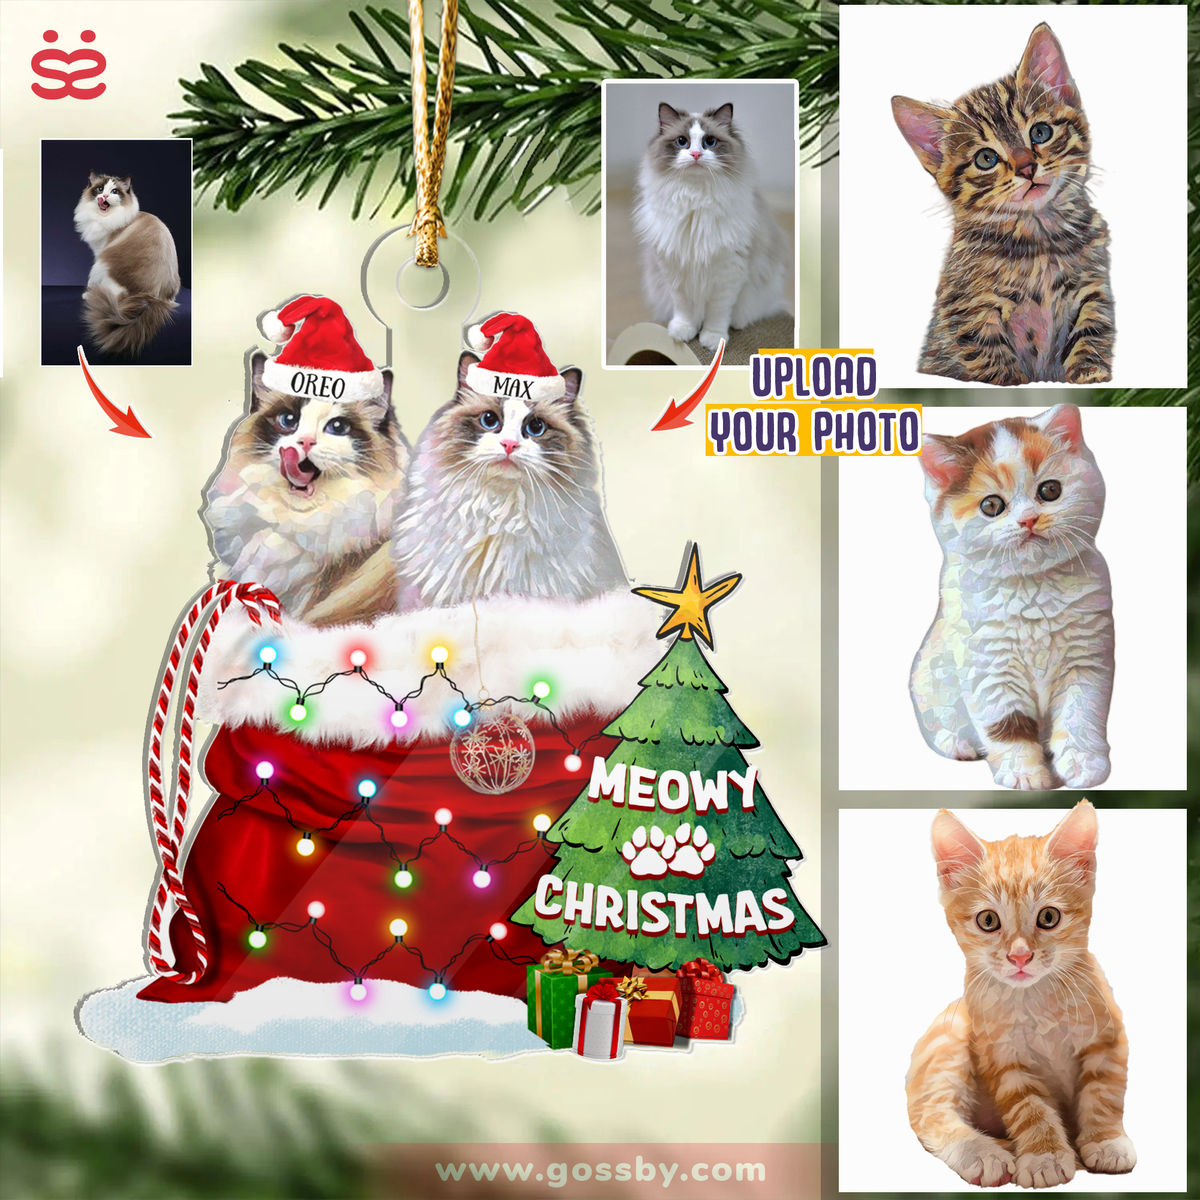 Cat Lover Gifts - Meowy Christmas Ornament v2 - Custom Acrylic Ornament from Pet Photo